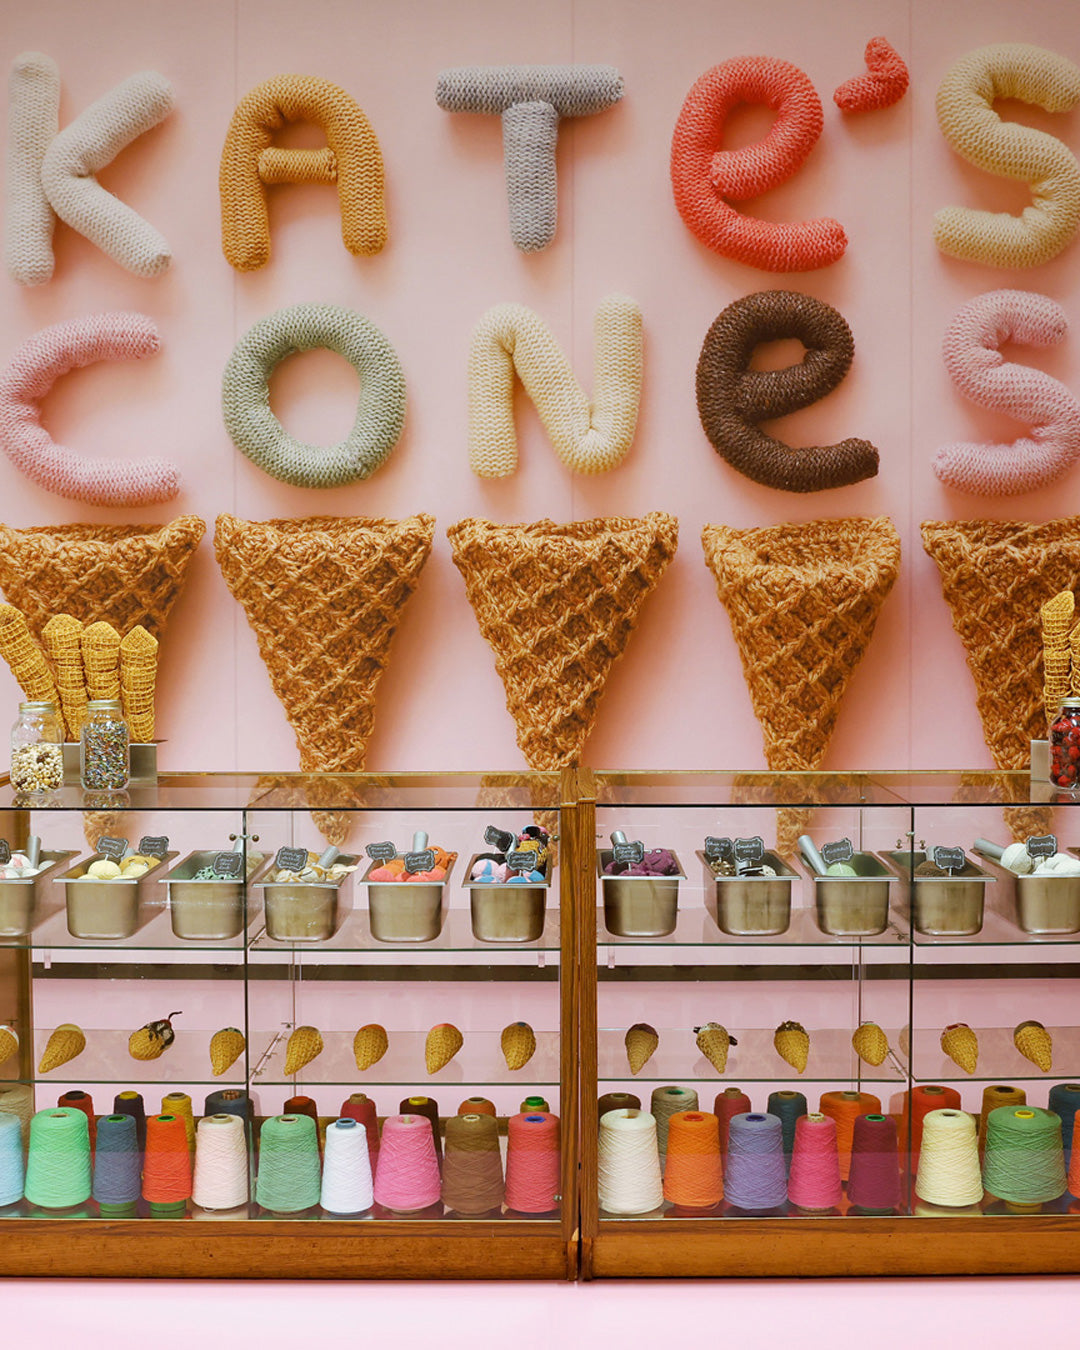 Women's creativity is celebrated through a playful yarn art installation featuring knit ice cream cones, brilliantly capturing the joyful fusion of art and imagination.